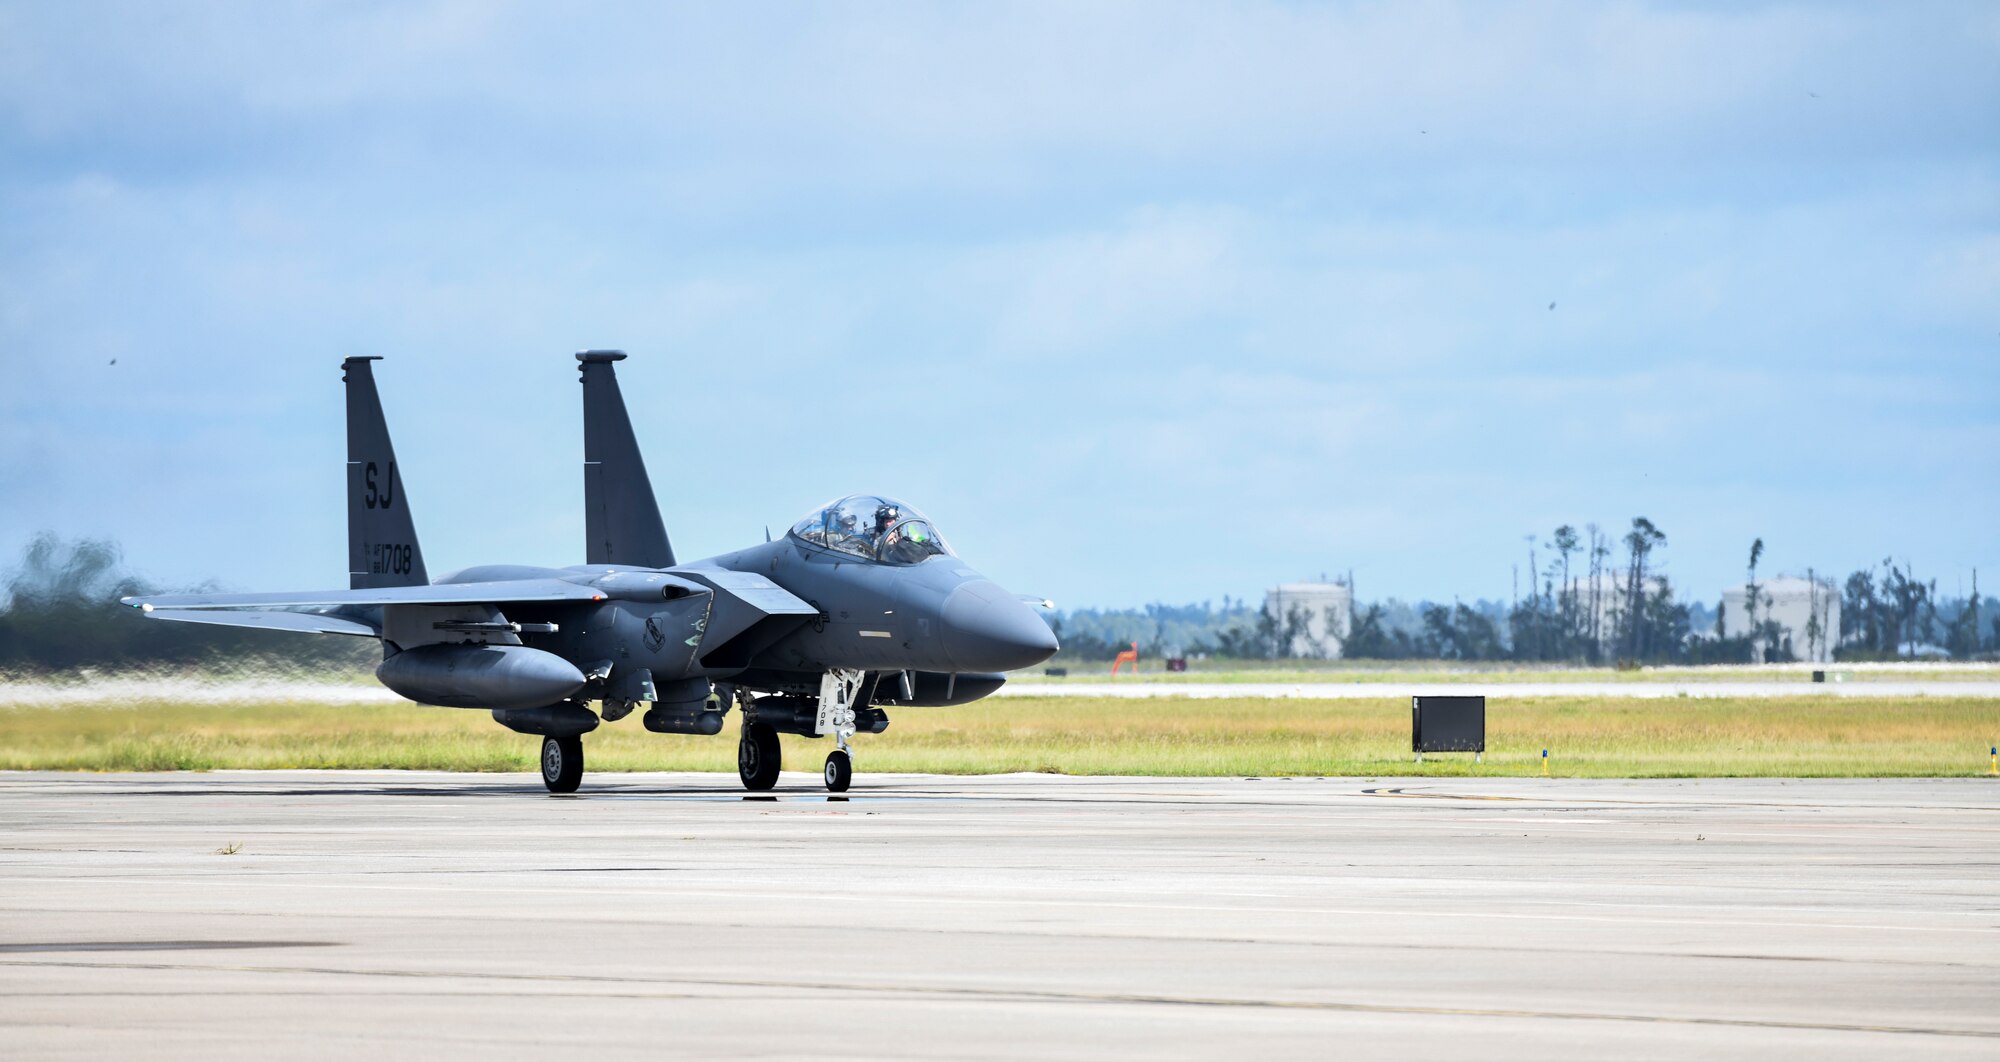 A U.S. Air Force F-15E Strike Eagle piloted by U.S. Air Force Gen. Mark Kelly, commander of Air Combat Command, taxis at Tyndall Air Force Base, Florida, Sept. 28, 2020. Kelly arrived at Tyndall to tour and discuss the ongoing rebuild and future plans for the base. (U.S. Air Force photo by Senior Airman Stefan Alvarez)